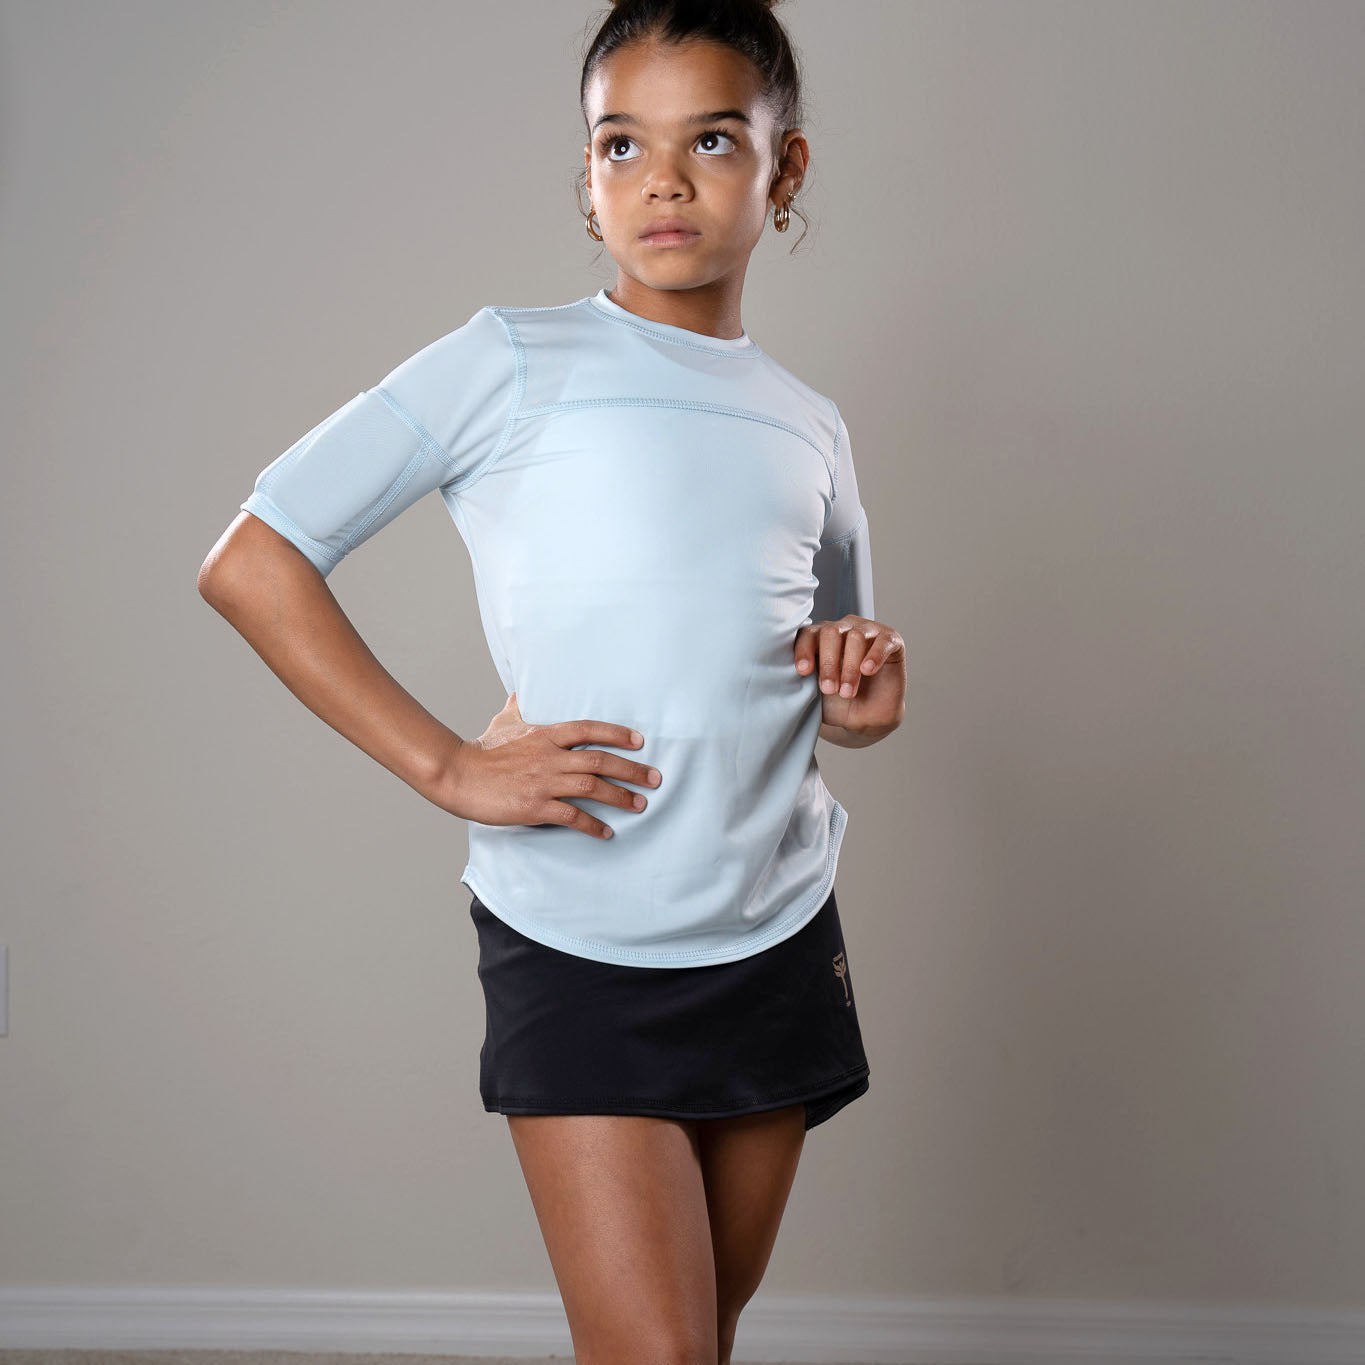 Girl's weighted short sleeve white top with weights